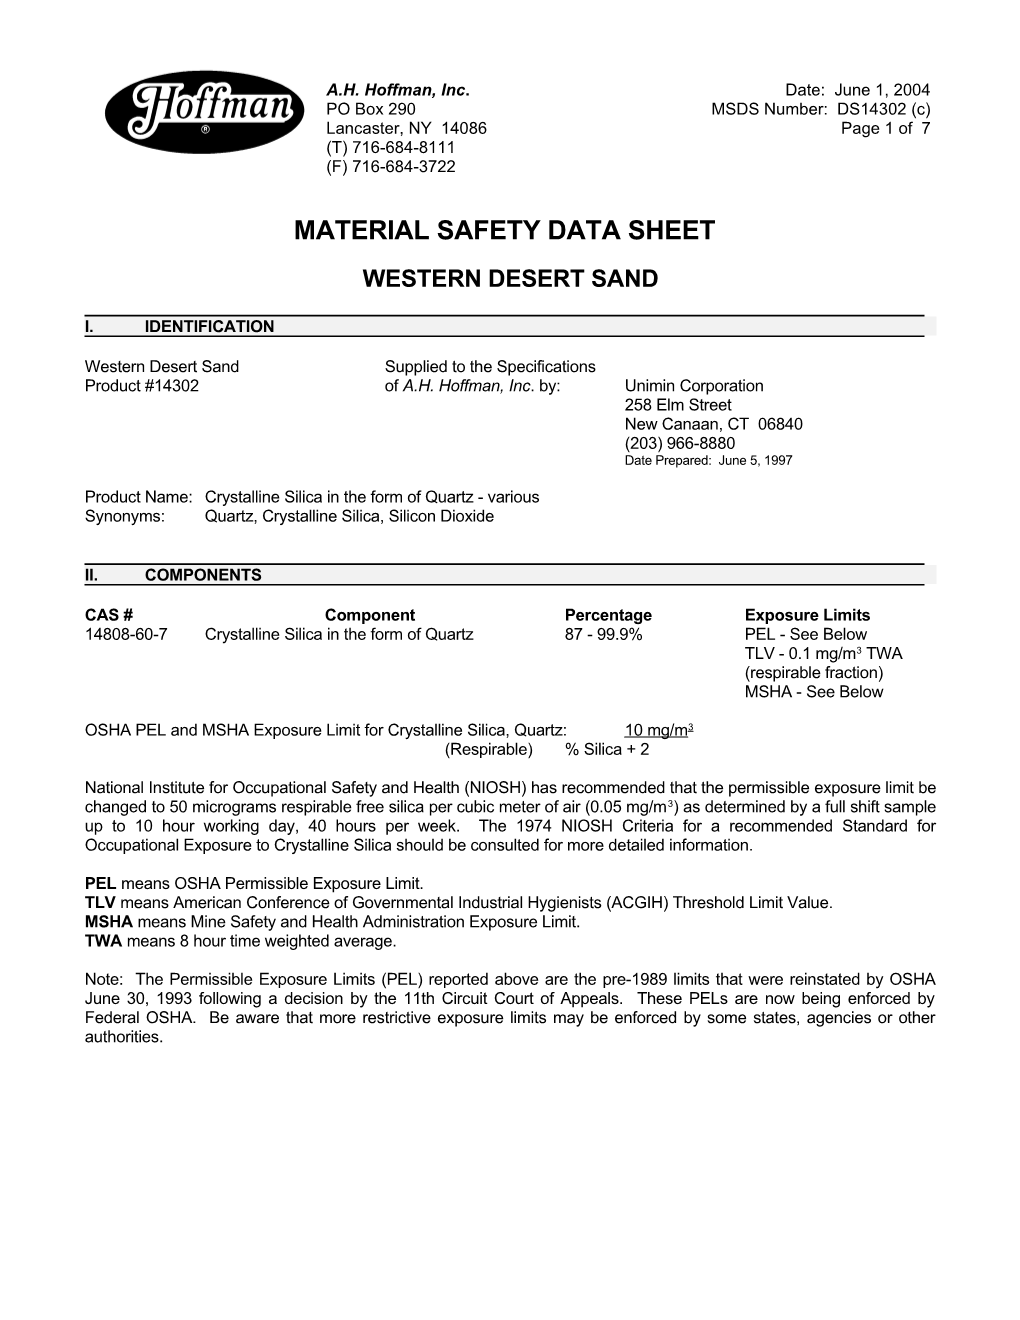 Material Safety Data Sheet s47